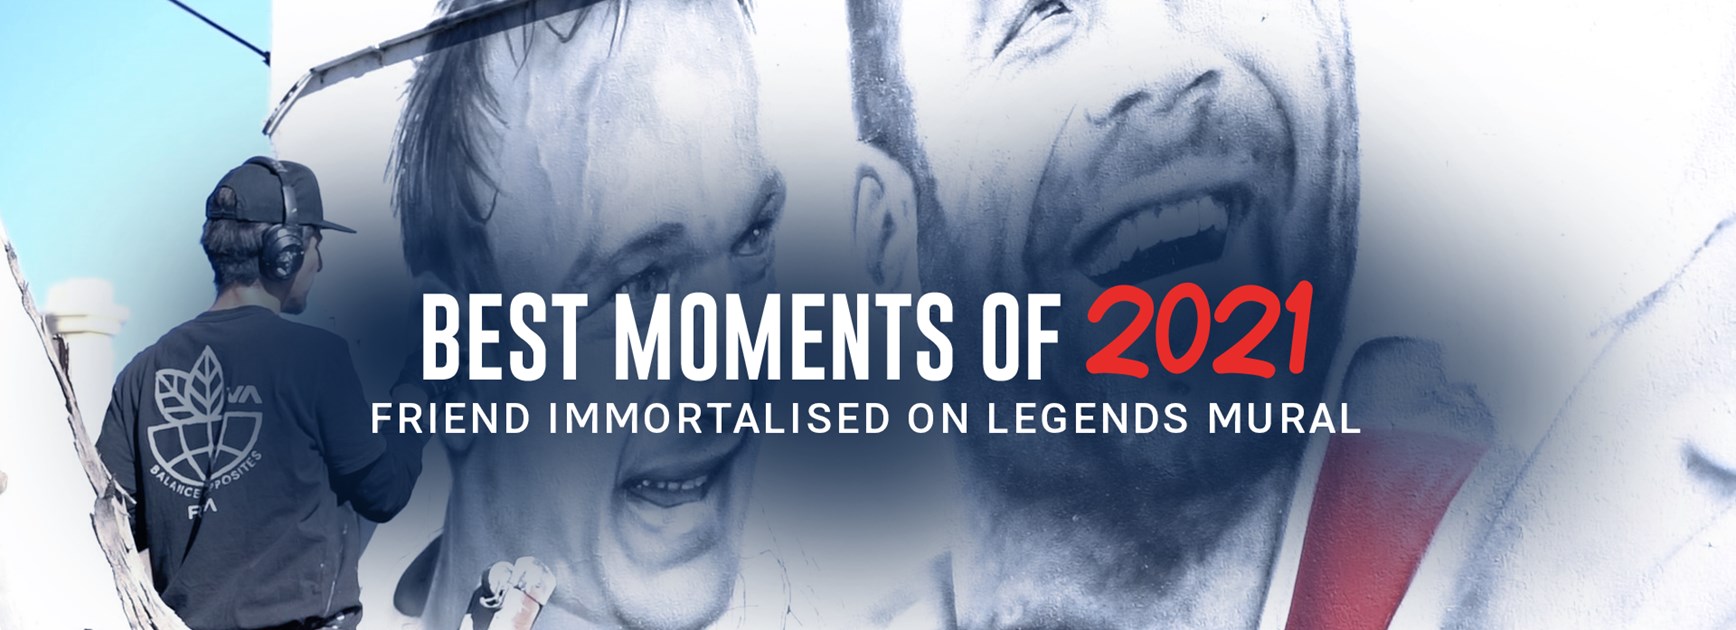 Best Moments of 2021: Friend Immortalised on Legends Mural